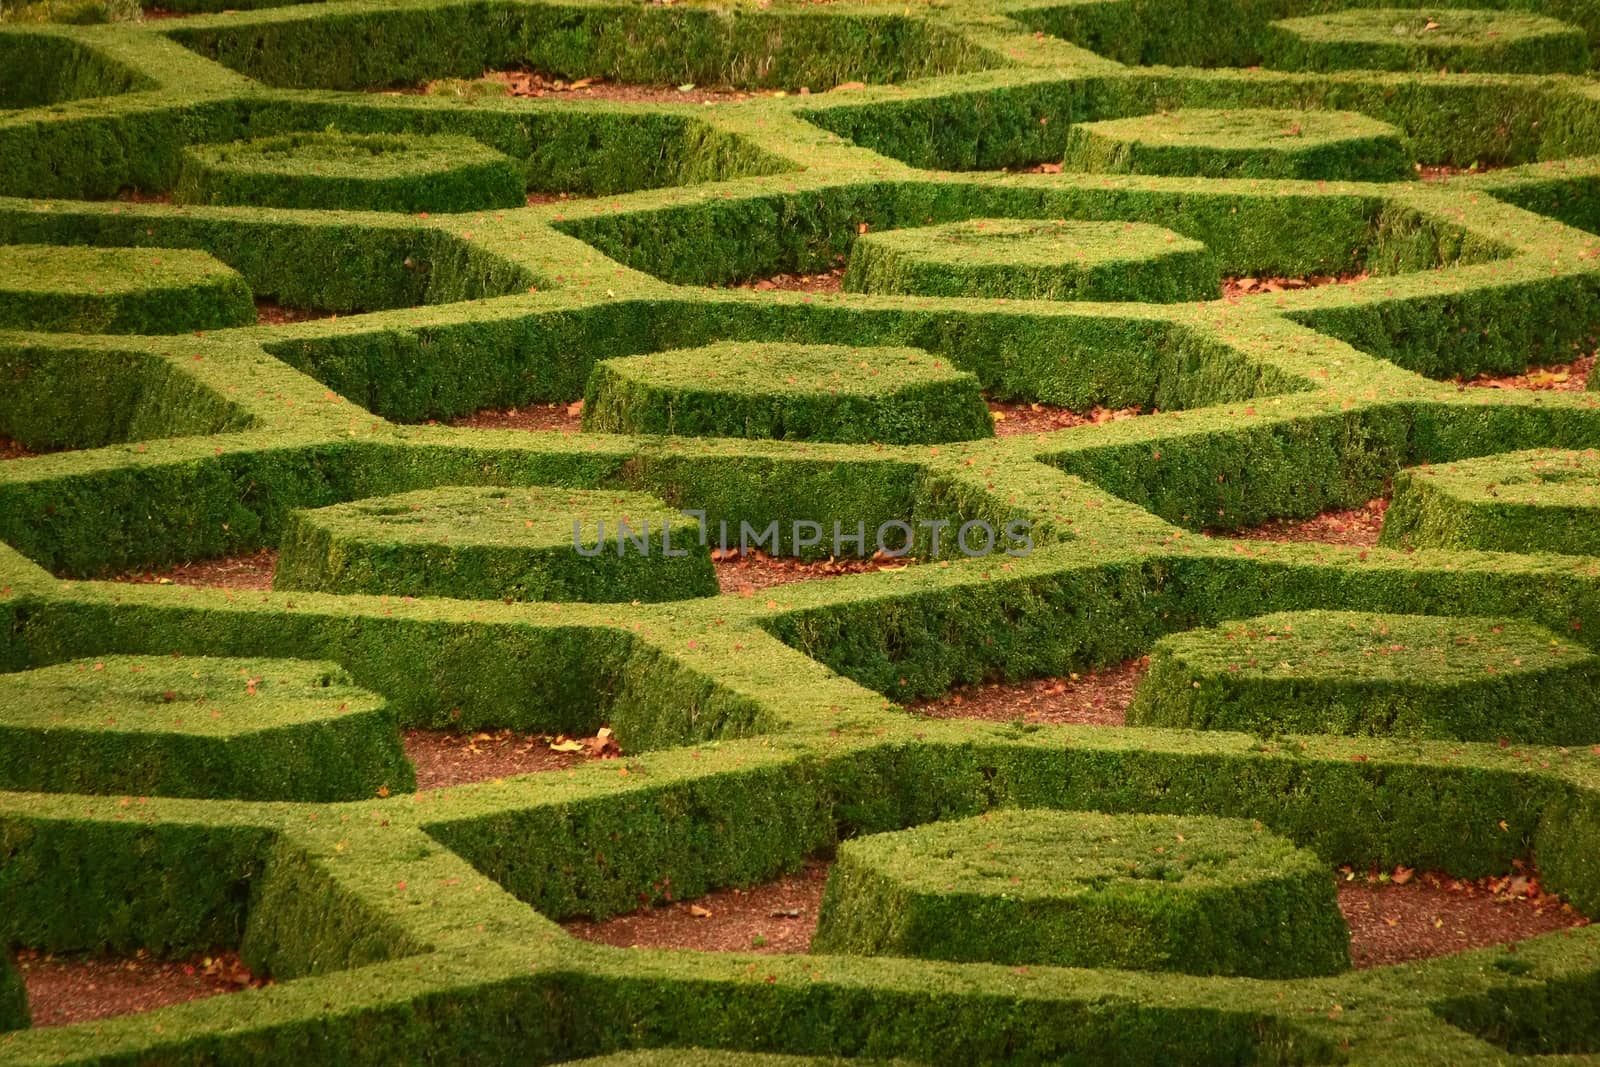 Green, manicured privets in hexagonal patterns at the Botanical Garden of Brussels, Belgium.